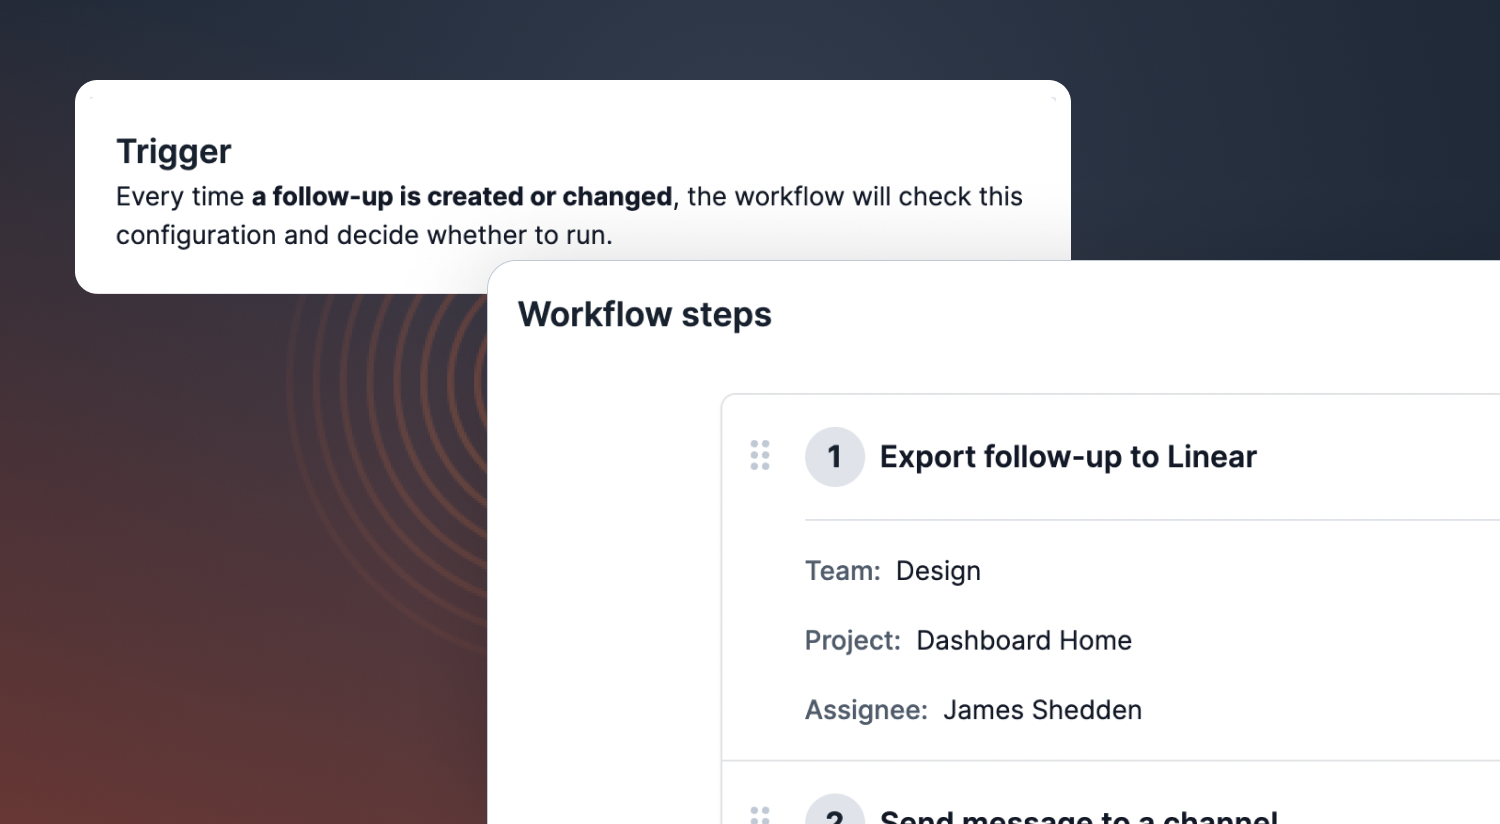 Workflow to auto-export follow-ups to Linear